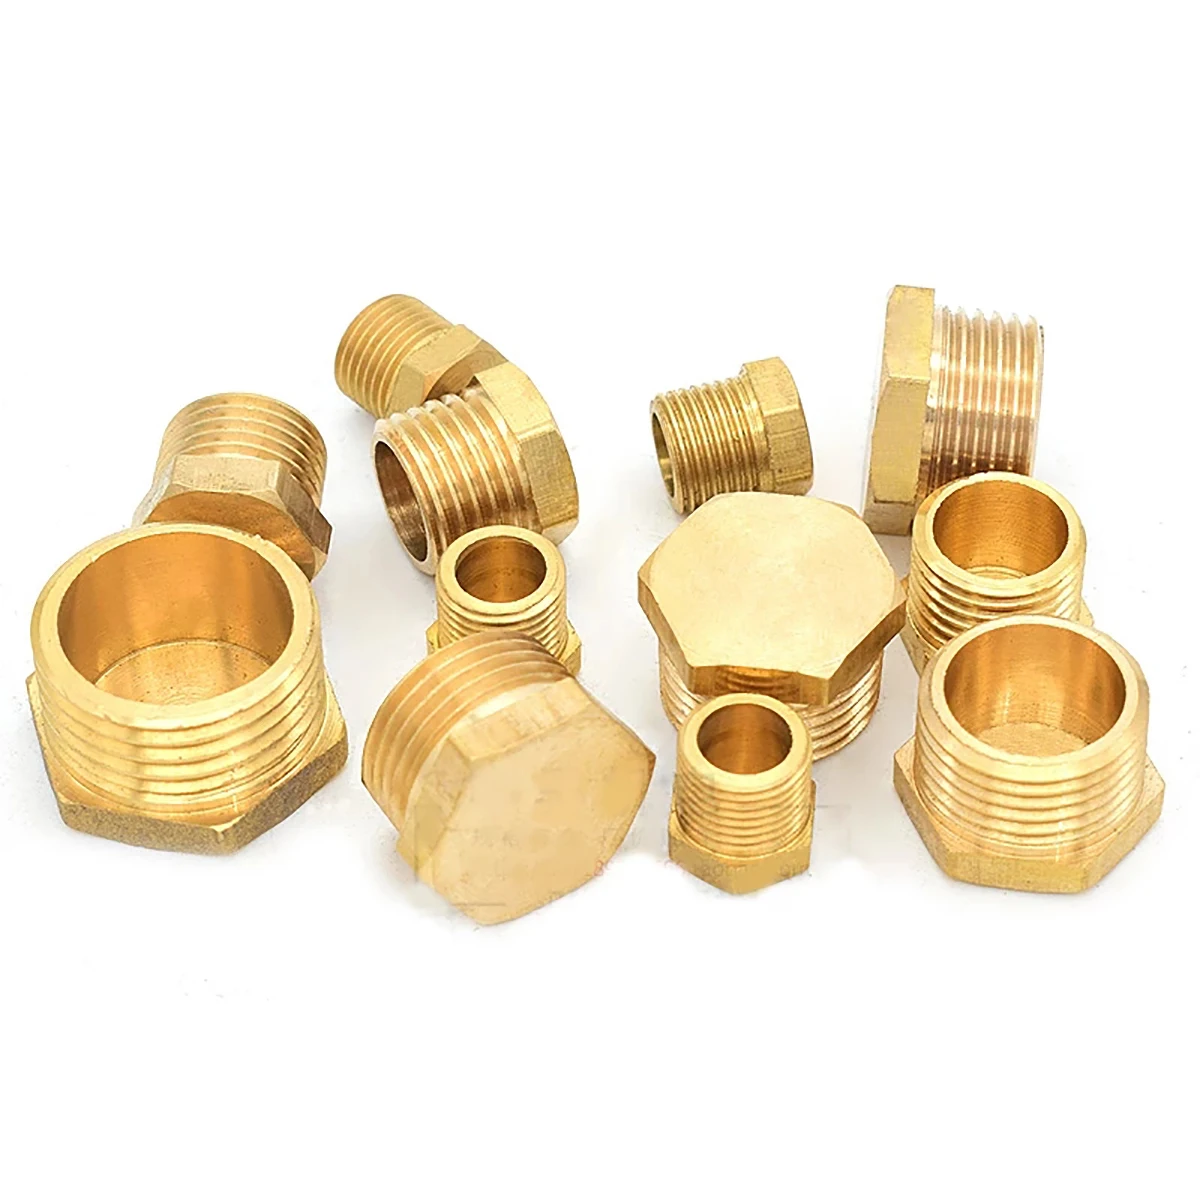 

1PCS 1/8" 1/4" 3/8" 1/2" 3/4" 1" 1.2" 1.5" 2" BSP Male Thread Copper End Cap Plug Brass Pipe Fitting Coupler Connector Adapter